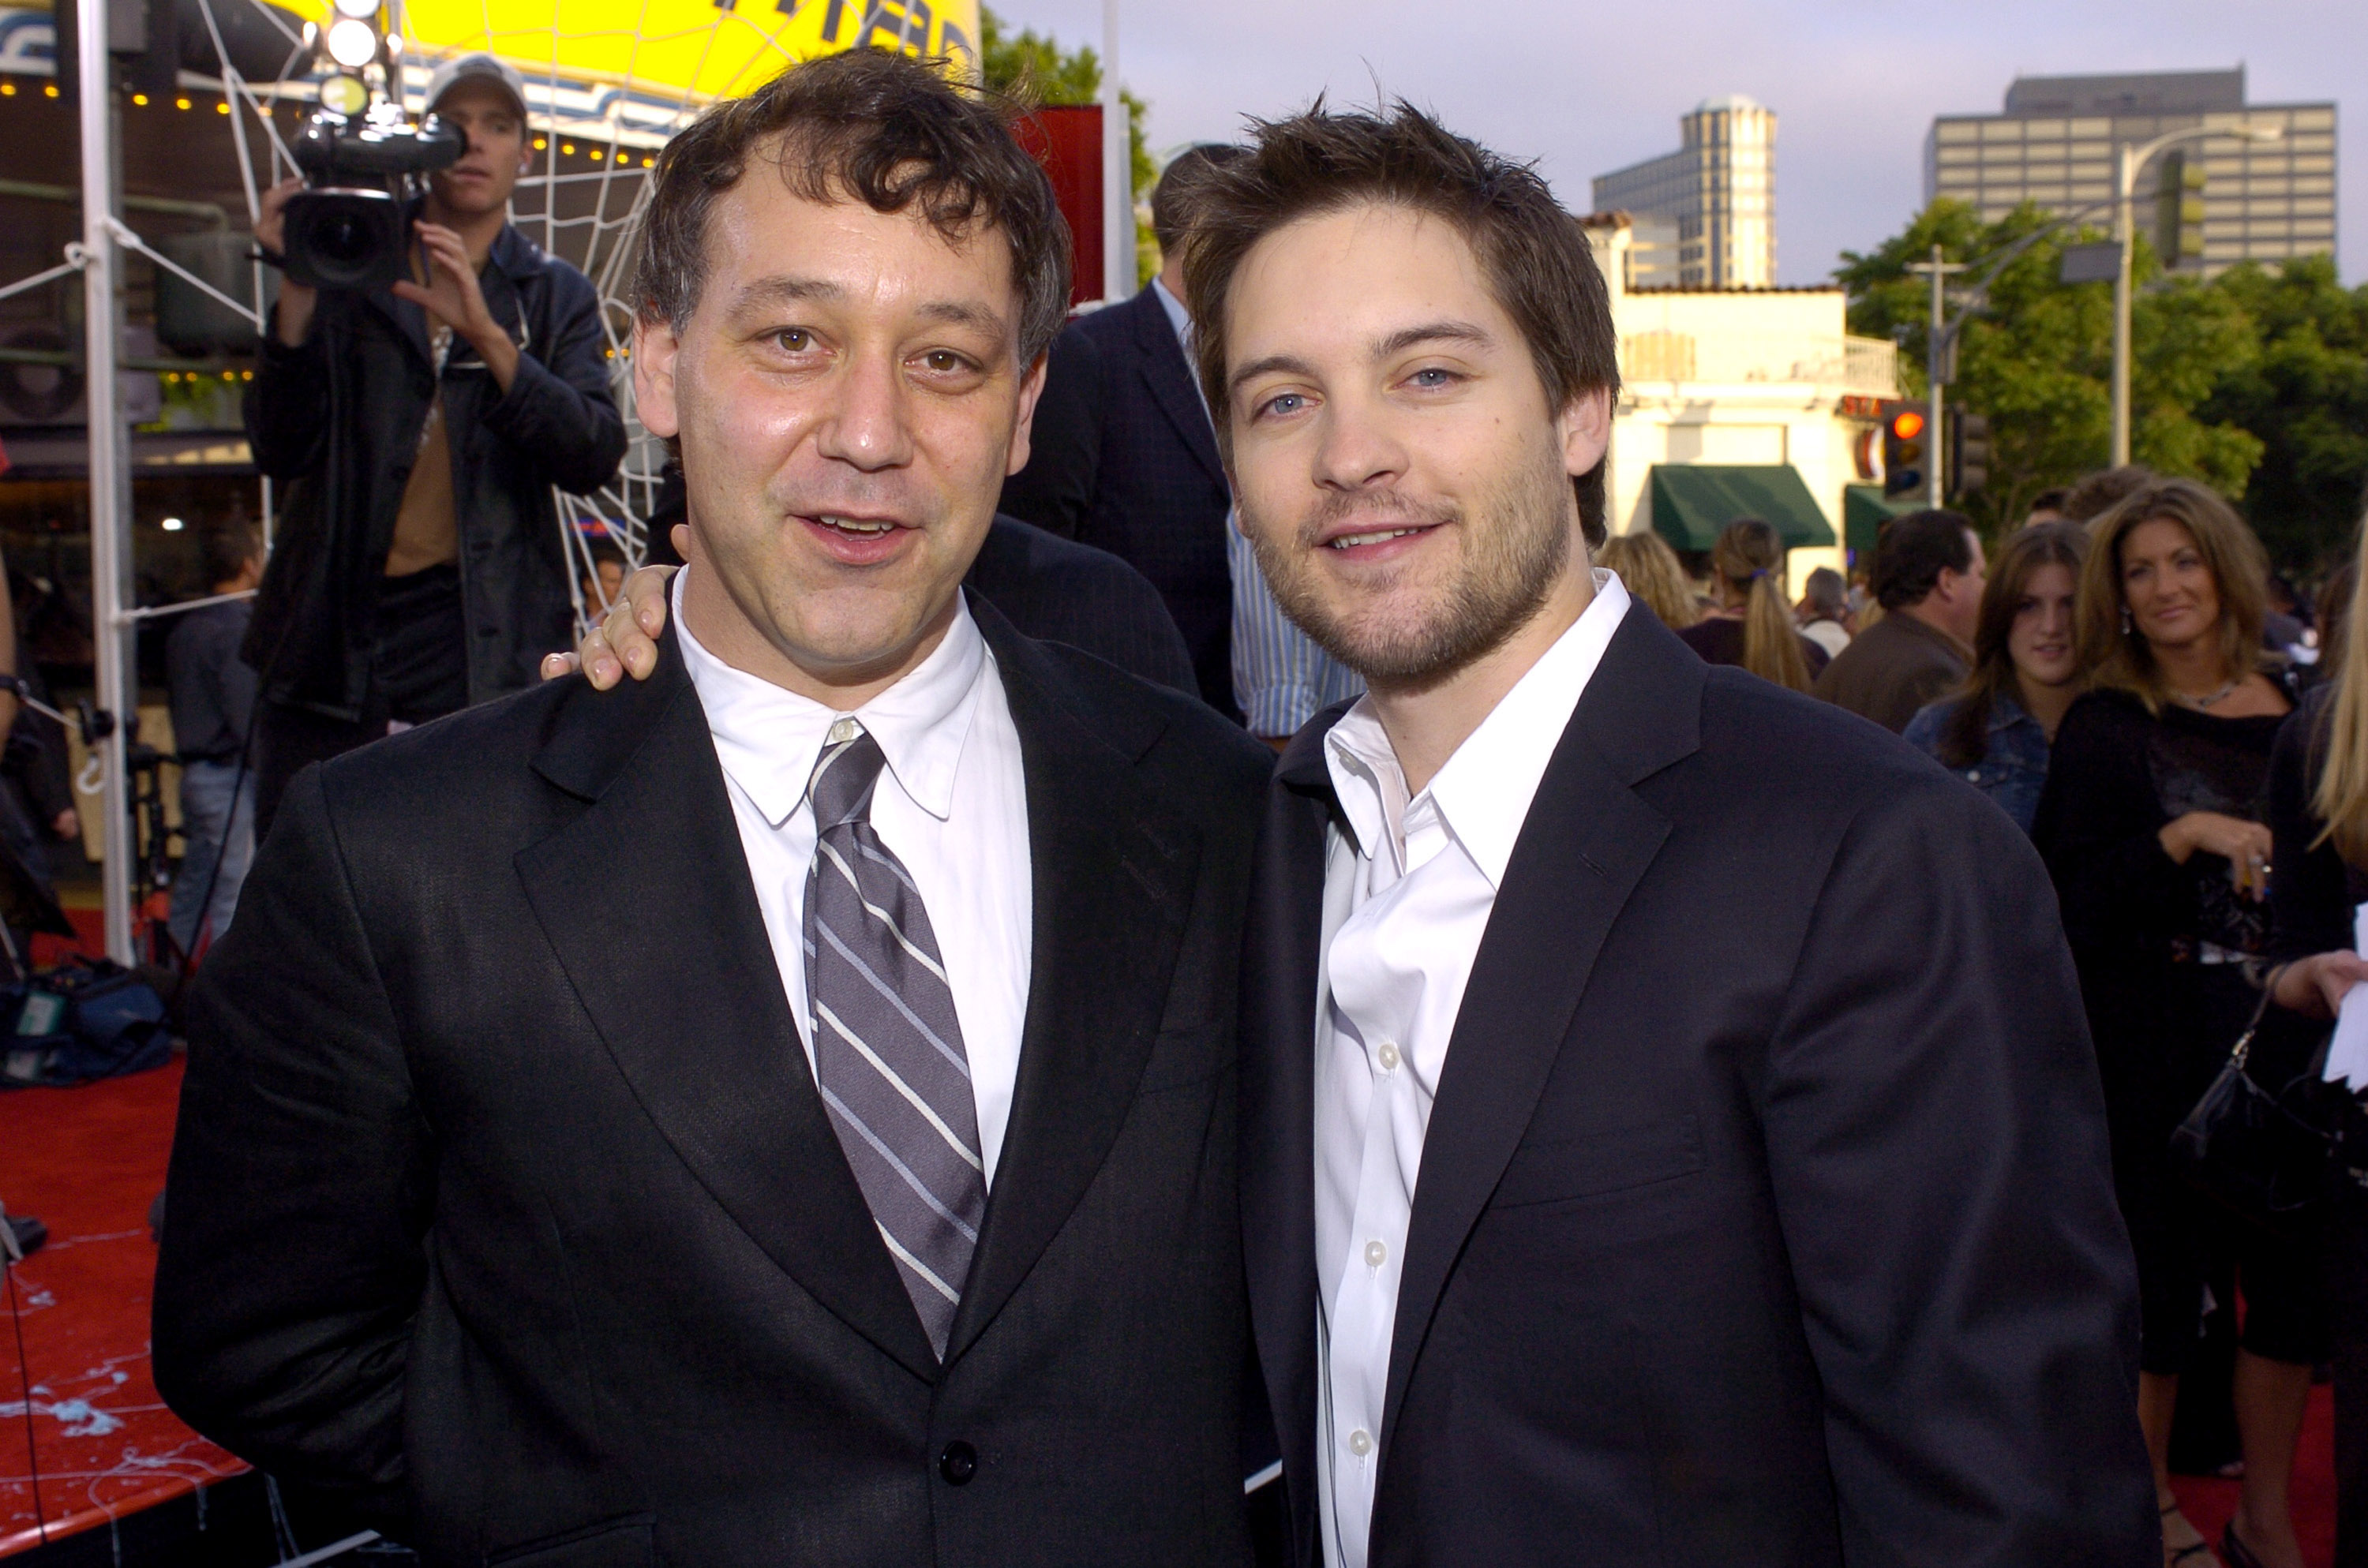 'Spider-Man' 2 director Sam Raimi and the film's star Tobey Maguire pose for pictures together on the red carpet for the premiere. Raimi wears a black suit over a white button-up shirt and a gray and white striped tie. Maguire wears a black suit over a white button-up shirt.